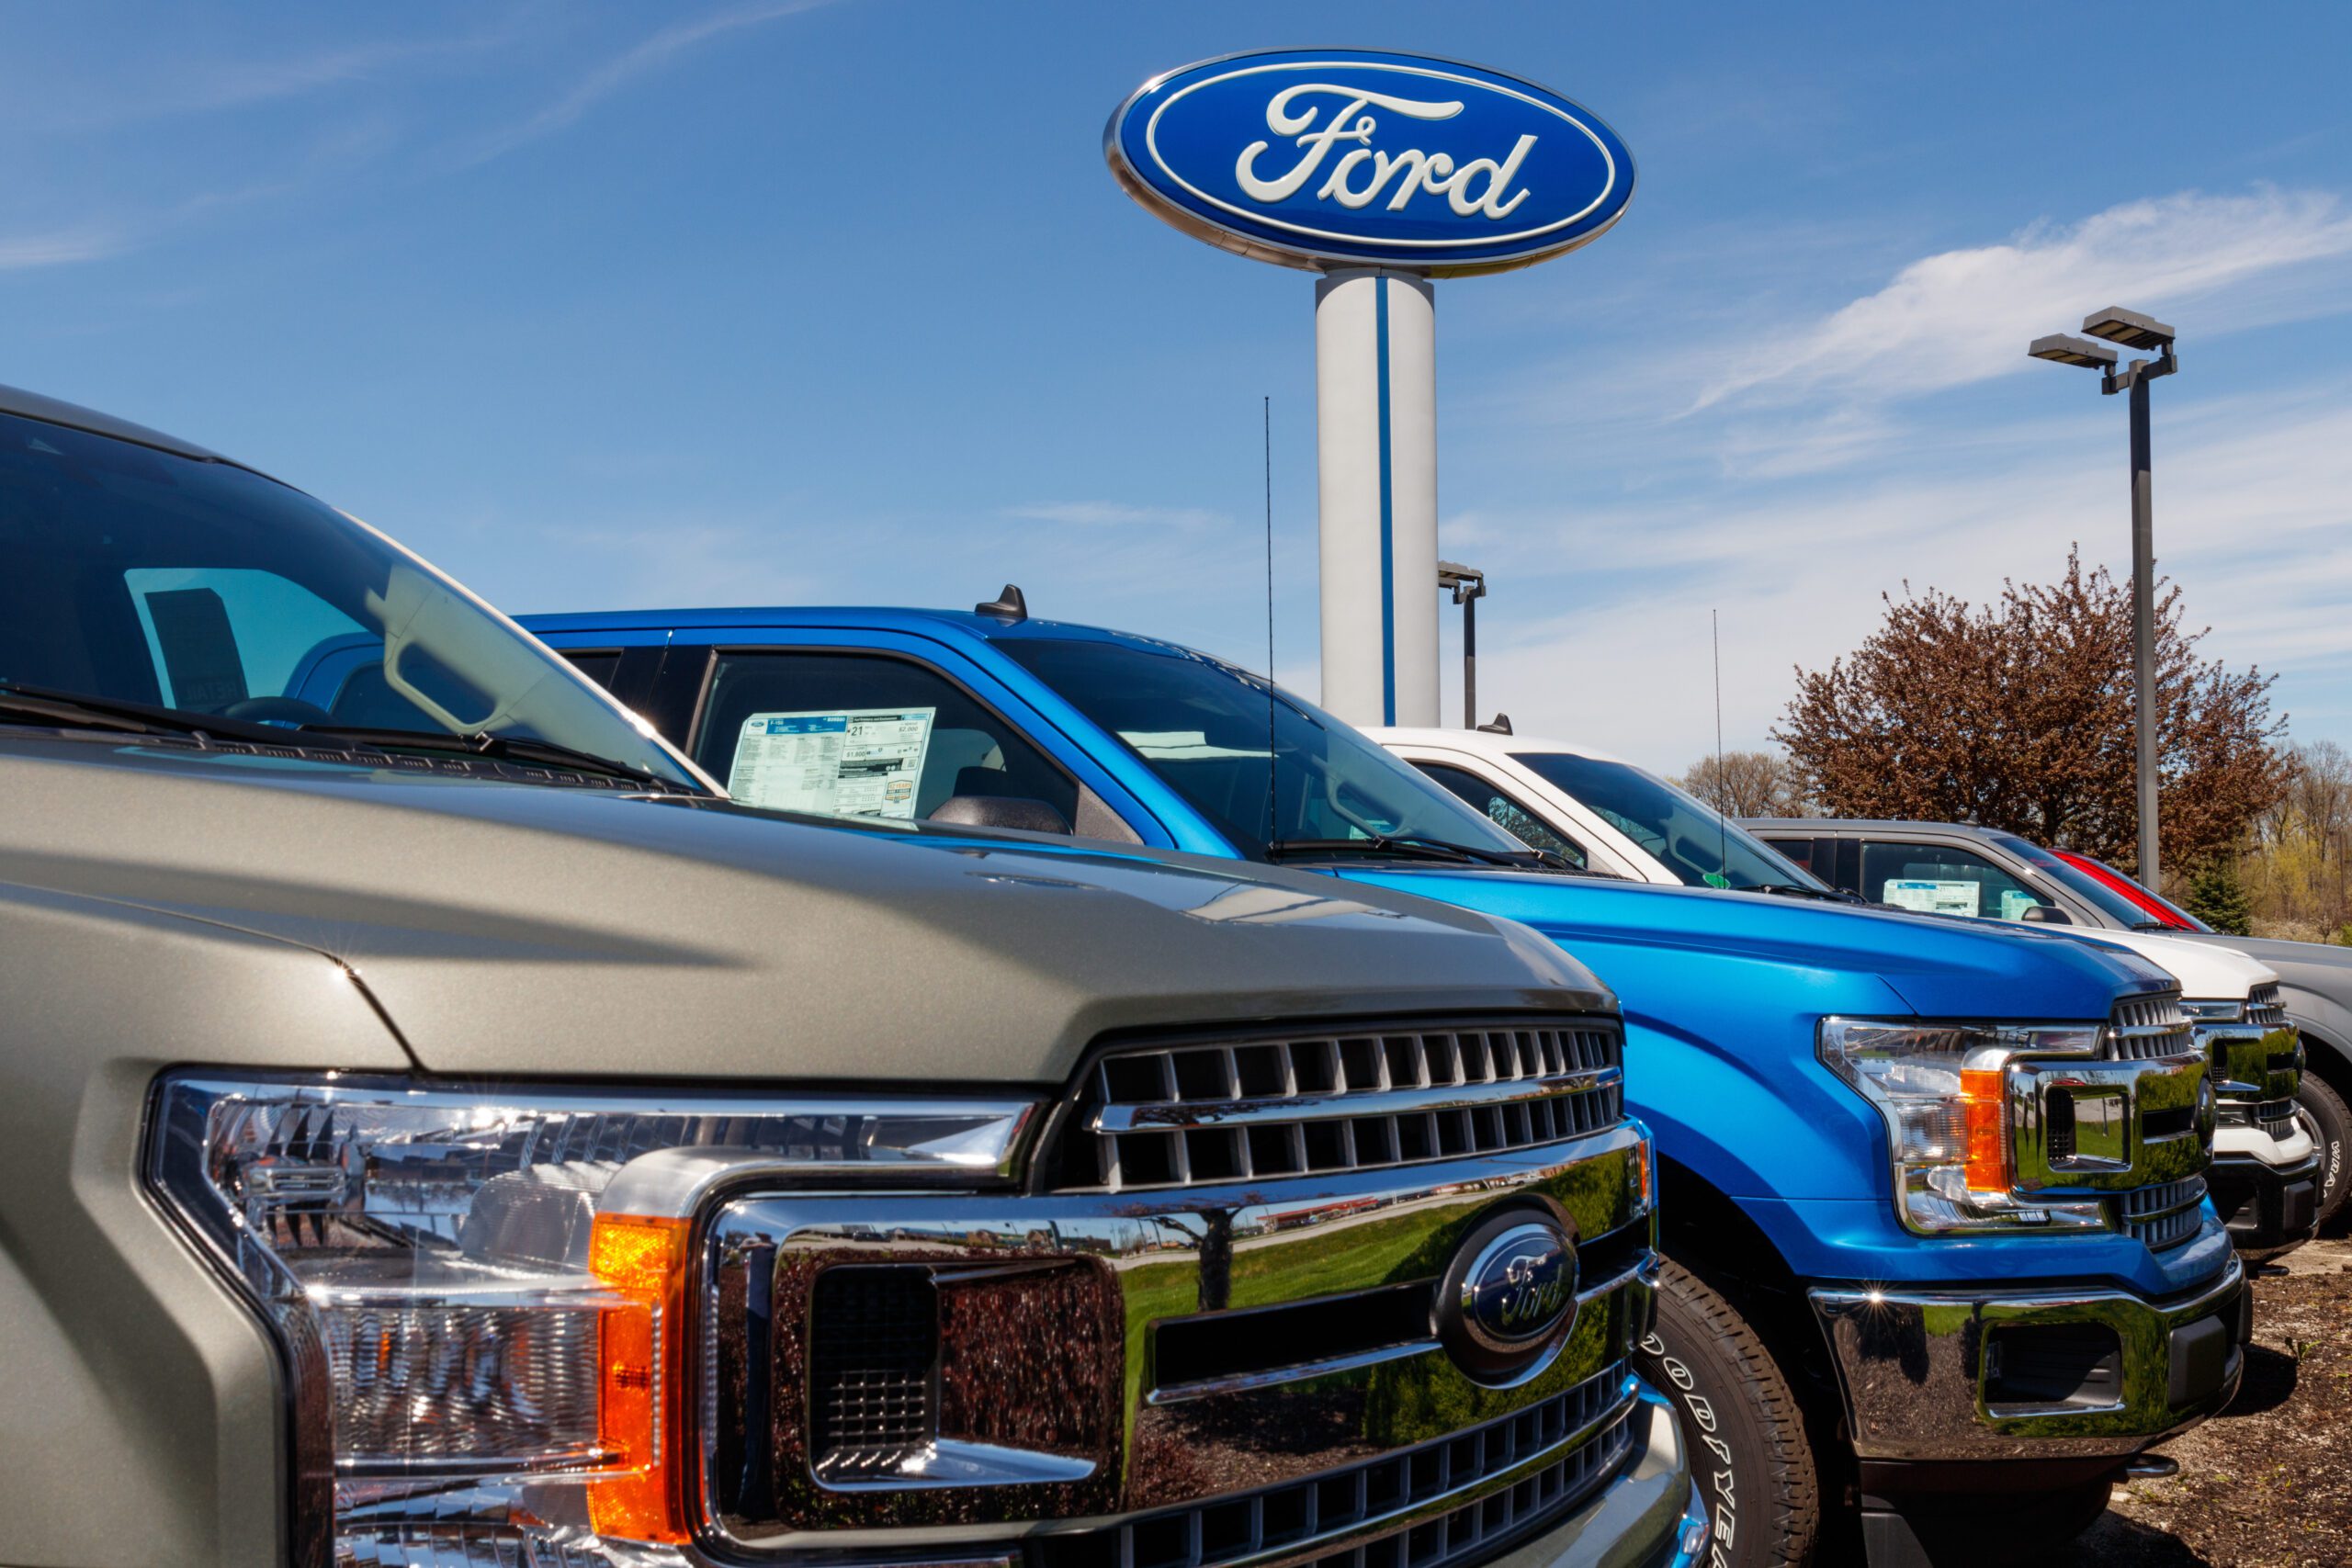 A class action alleges Ford Motor Company sold trucks with defective brake systems, which results in brake system failure.